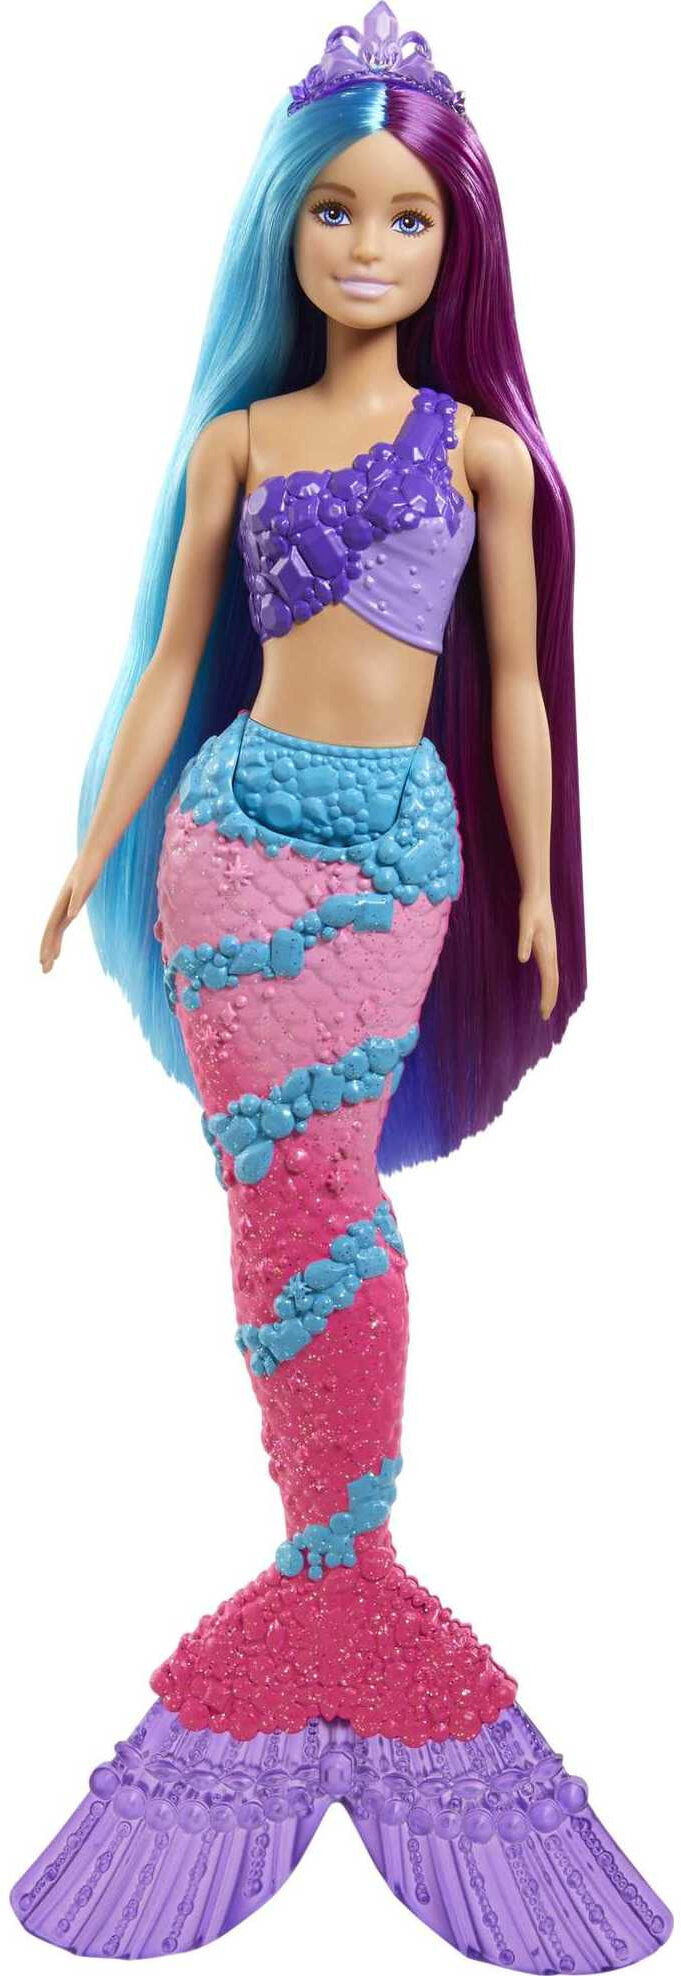 30cm Fashionable Mermaid Doll with Lights Sounds Kids Gift Toy Pink Hair 